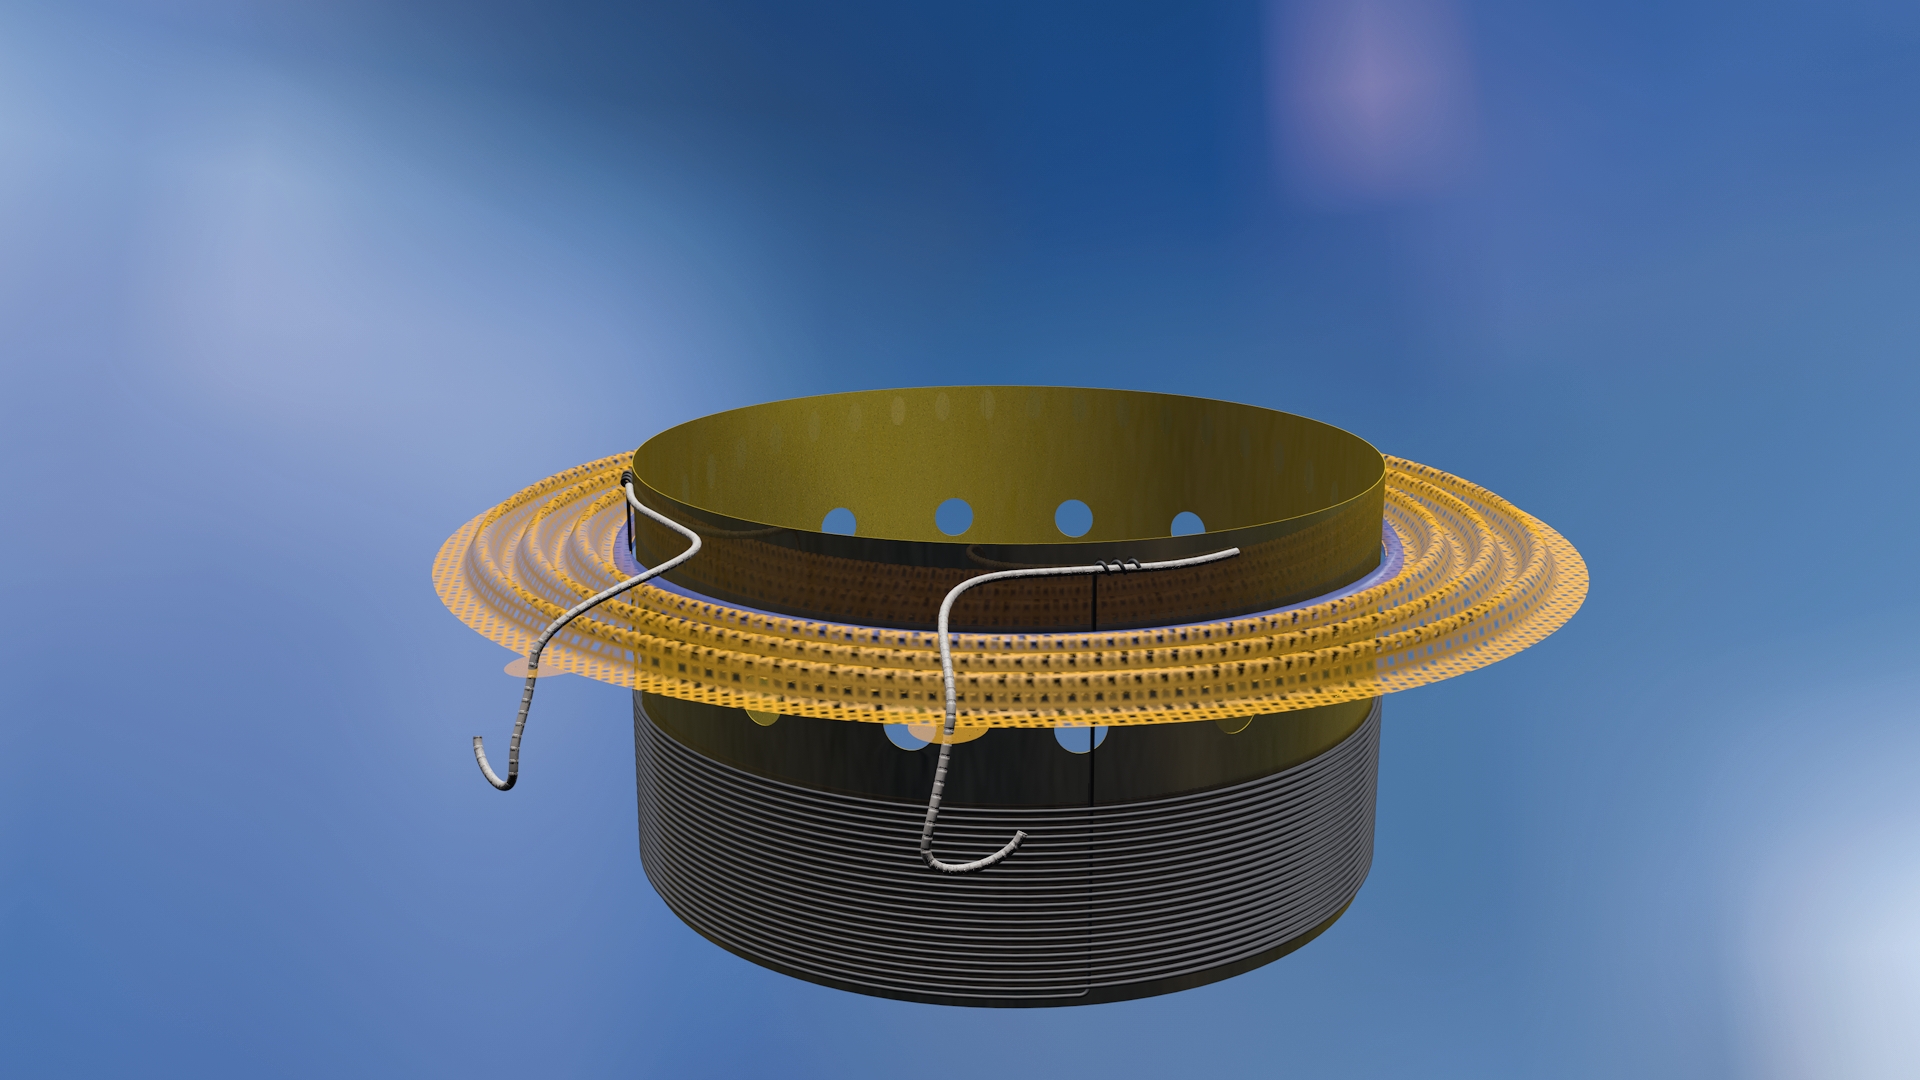 Light-curing allows making short work of spider-to-voice coil bonding